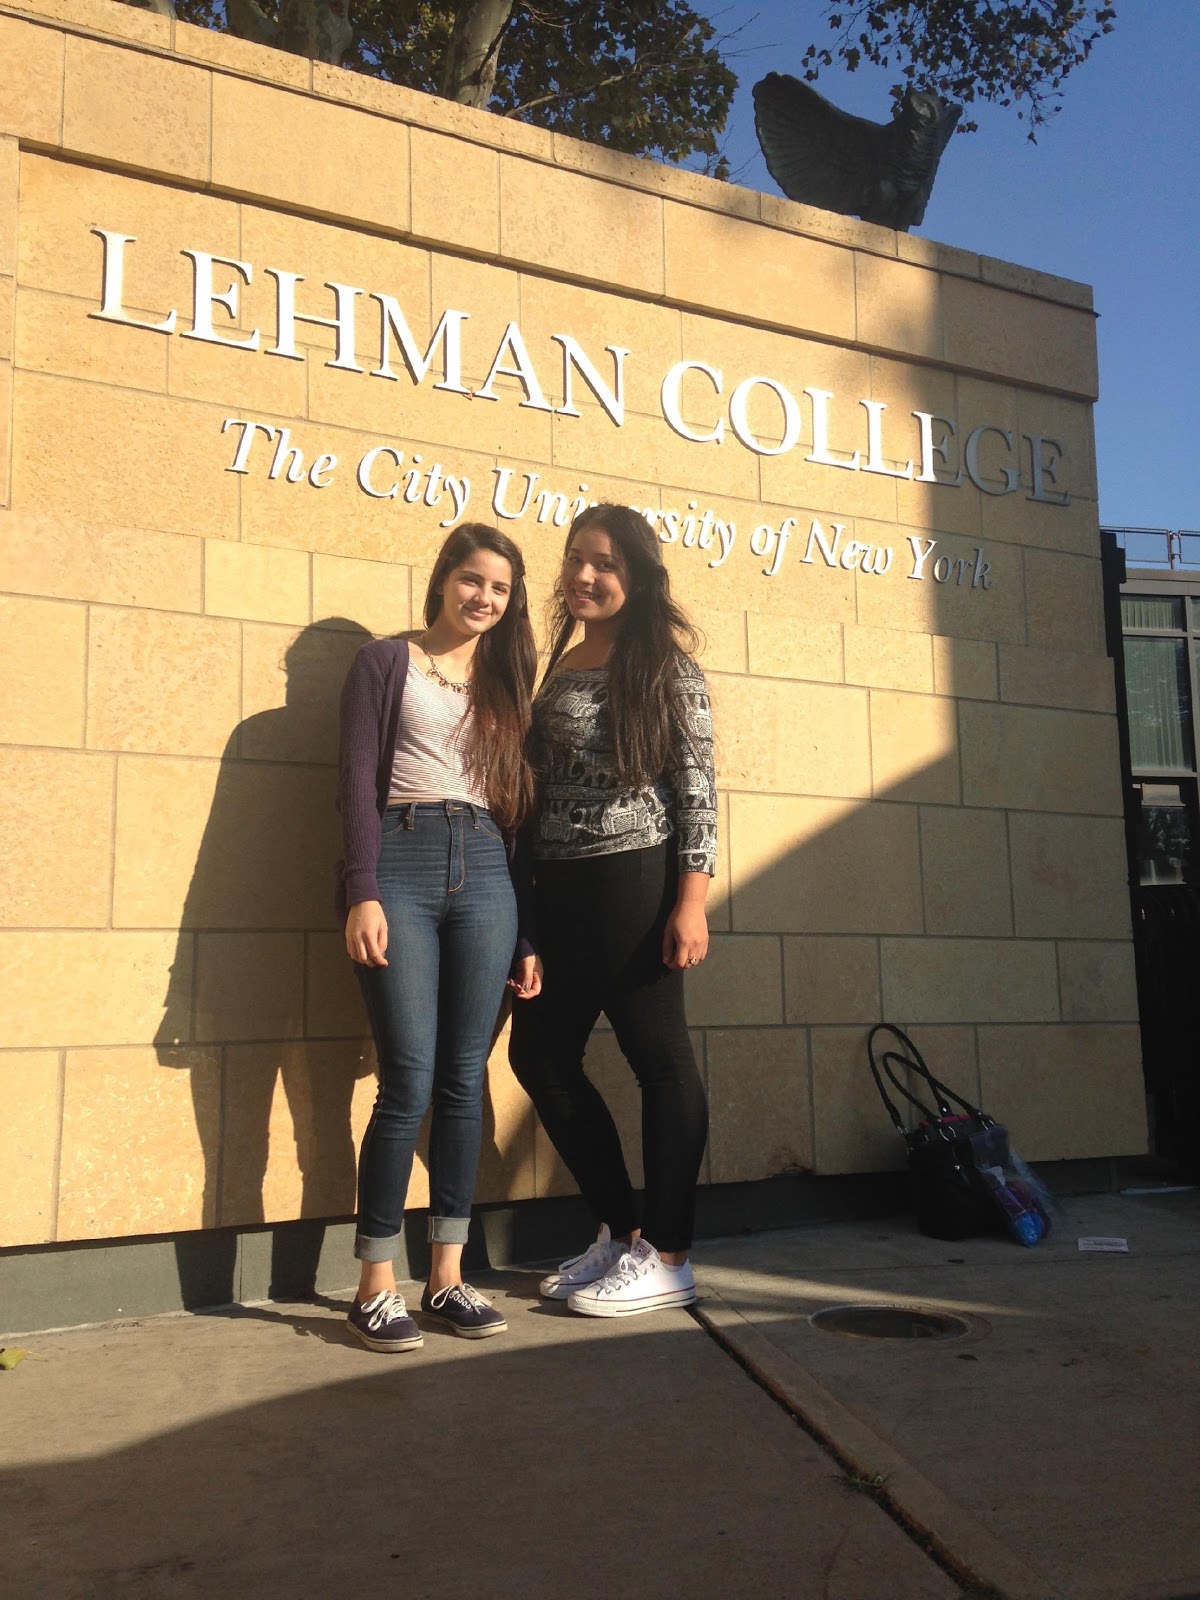 Andrea and Yessenia standing in front of an engraving at Lehman College featuring the school's name and slogan